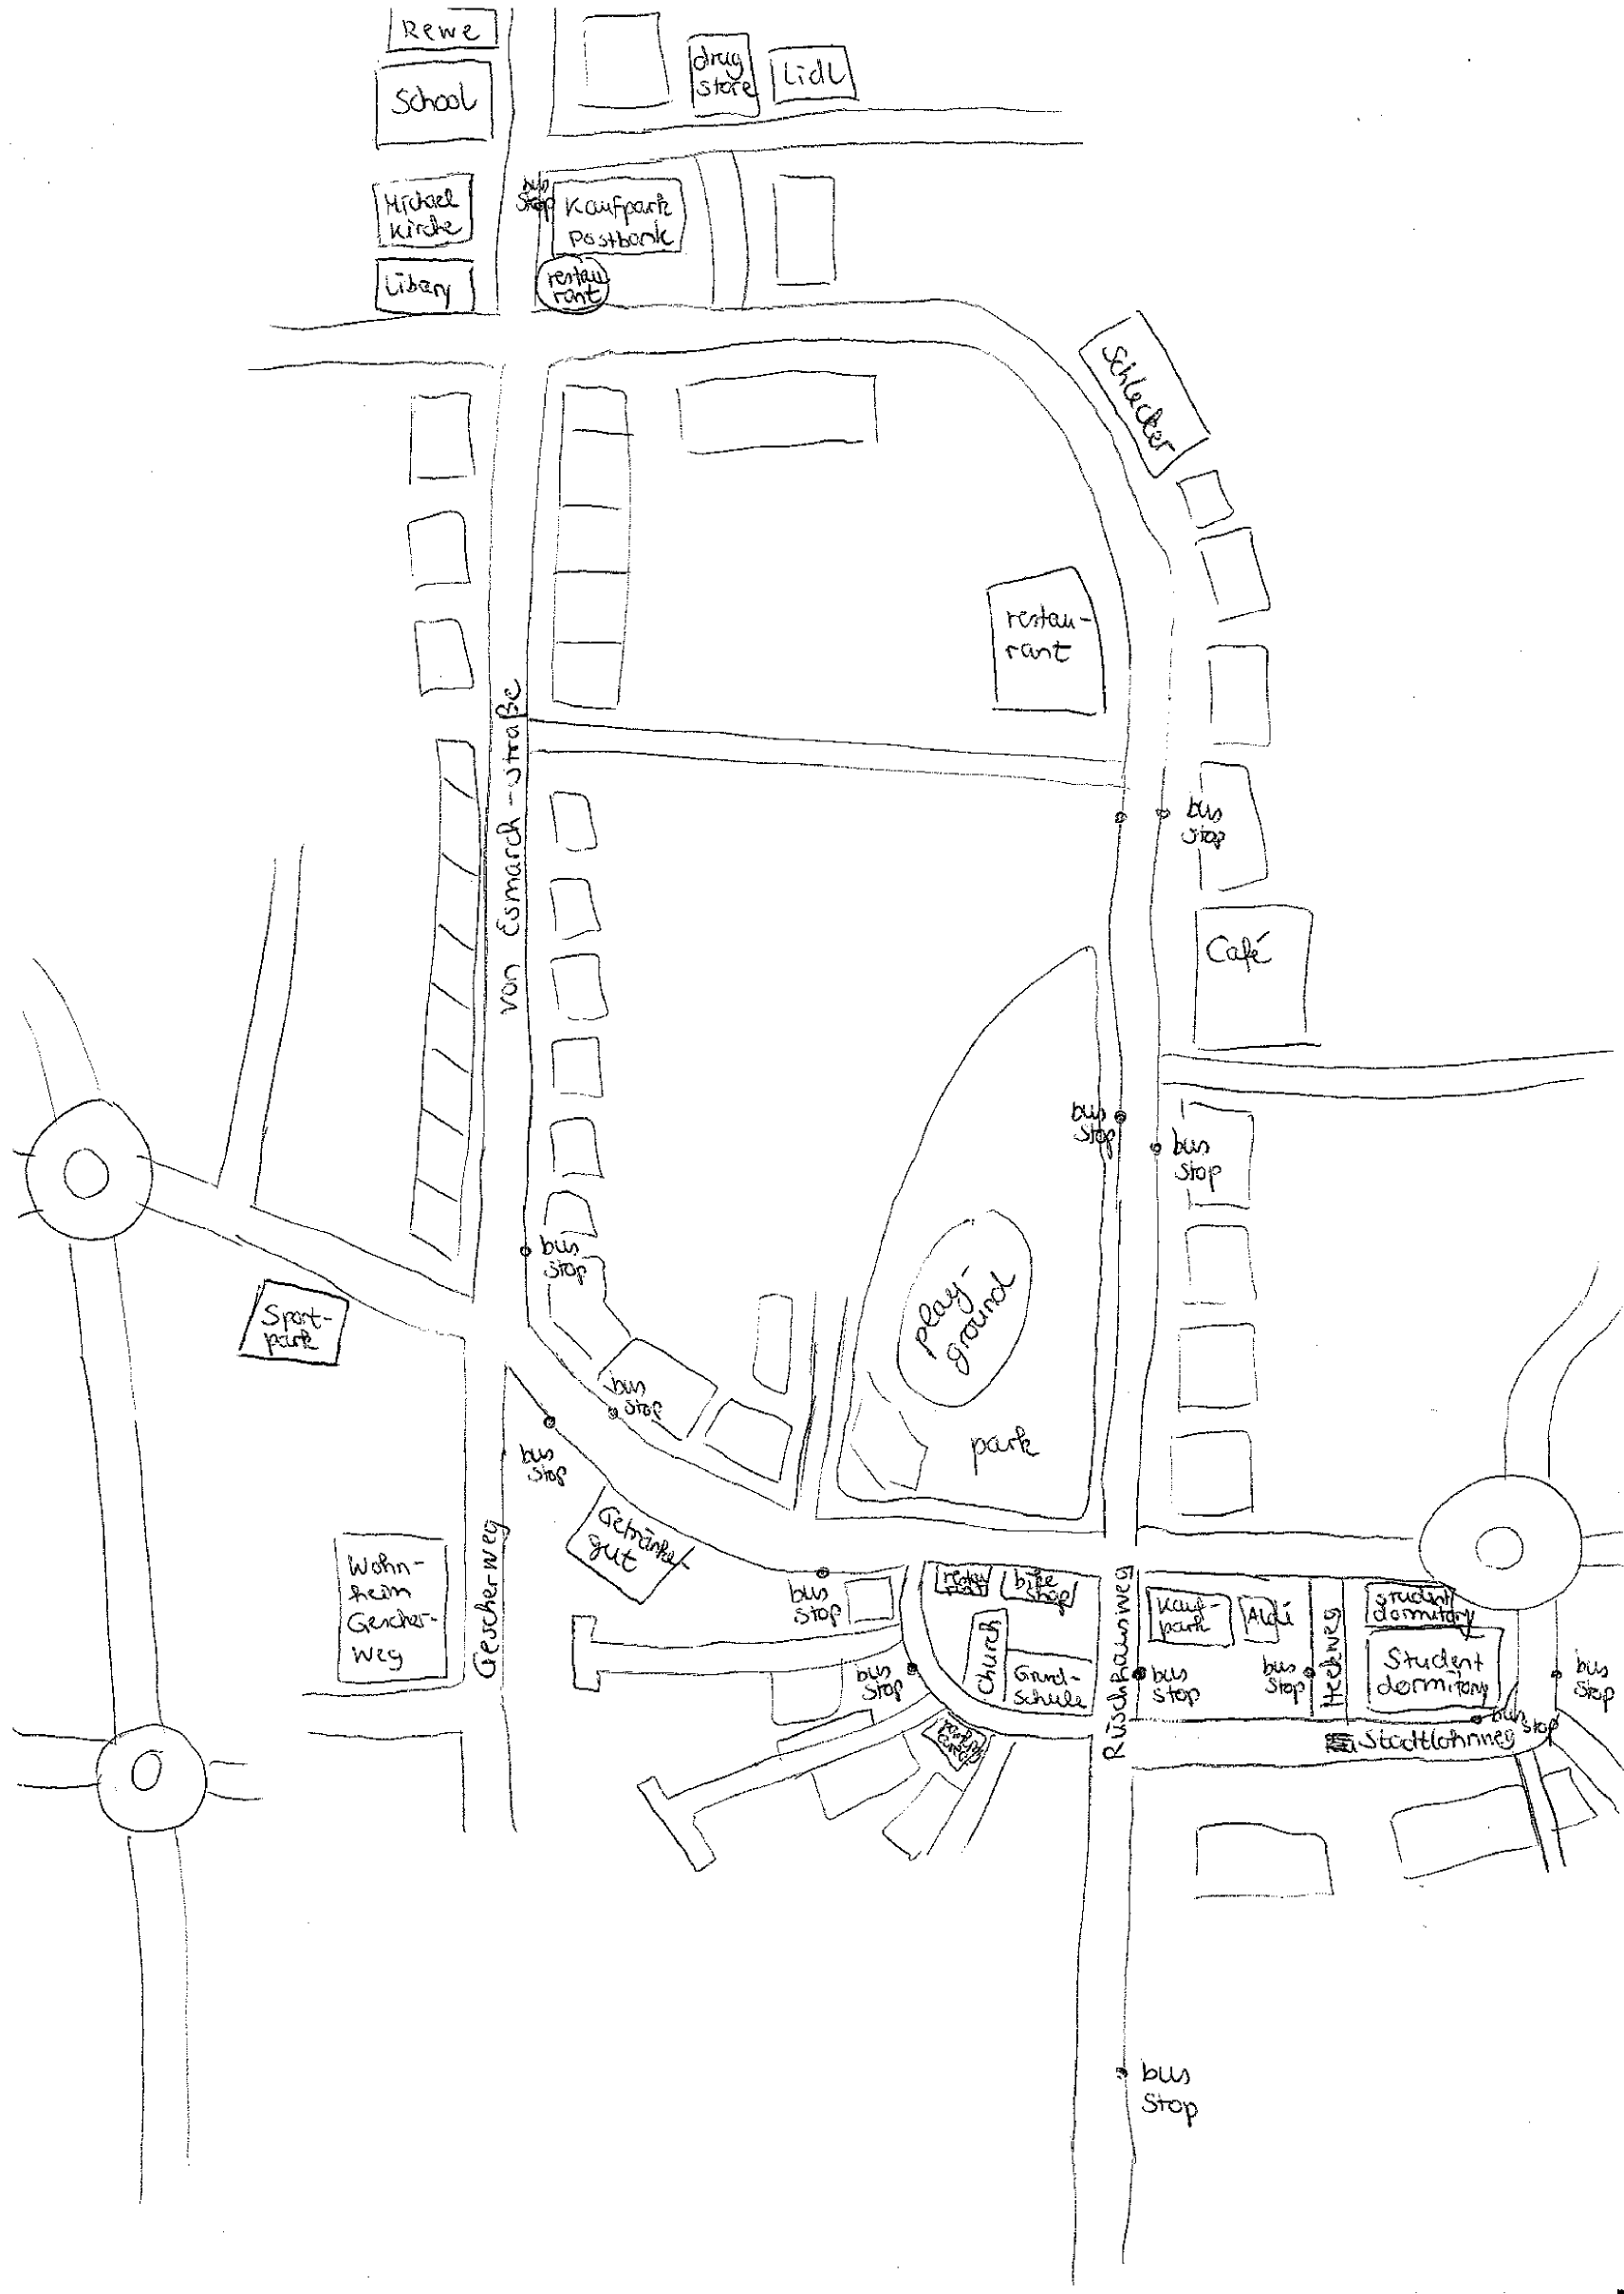 A Map of the town of Shrewsbury Mass Relief shown by hachures Shows  drawings of three churches Central Hall and School 1 and LM Parker  residence Also sketch of LM Parker sketching